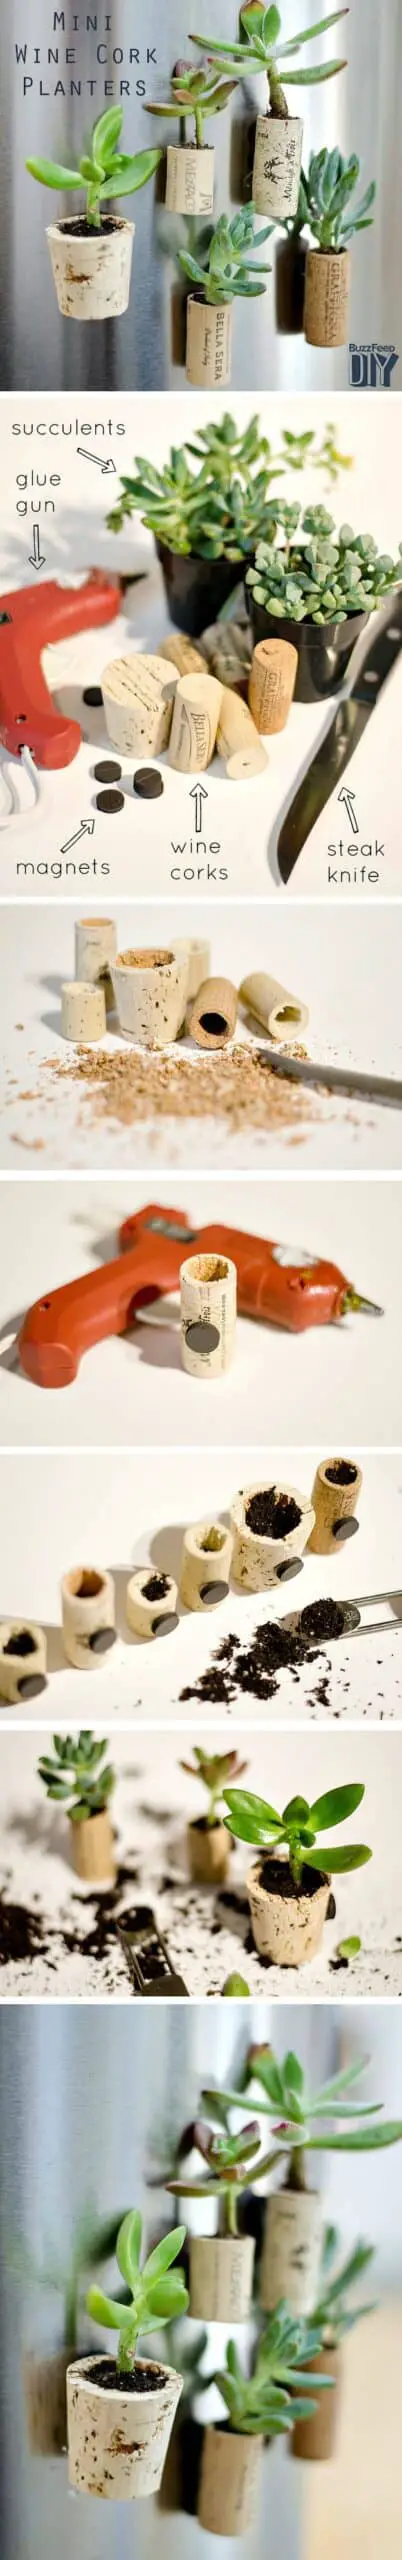 Diy: Tiny Planters From Upcycled Wine Corks 27 - bottle